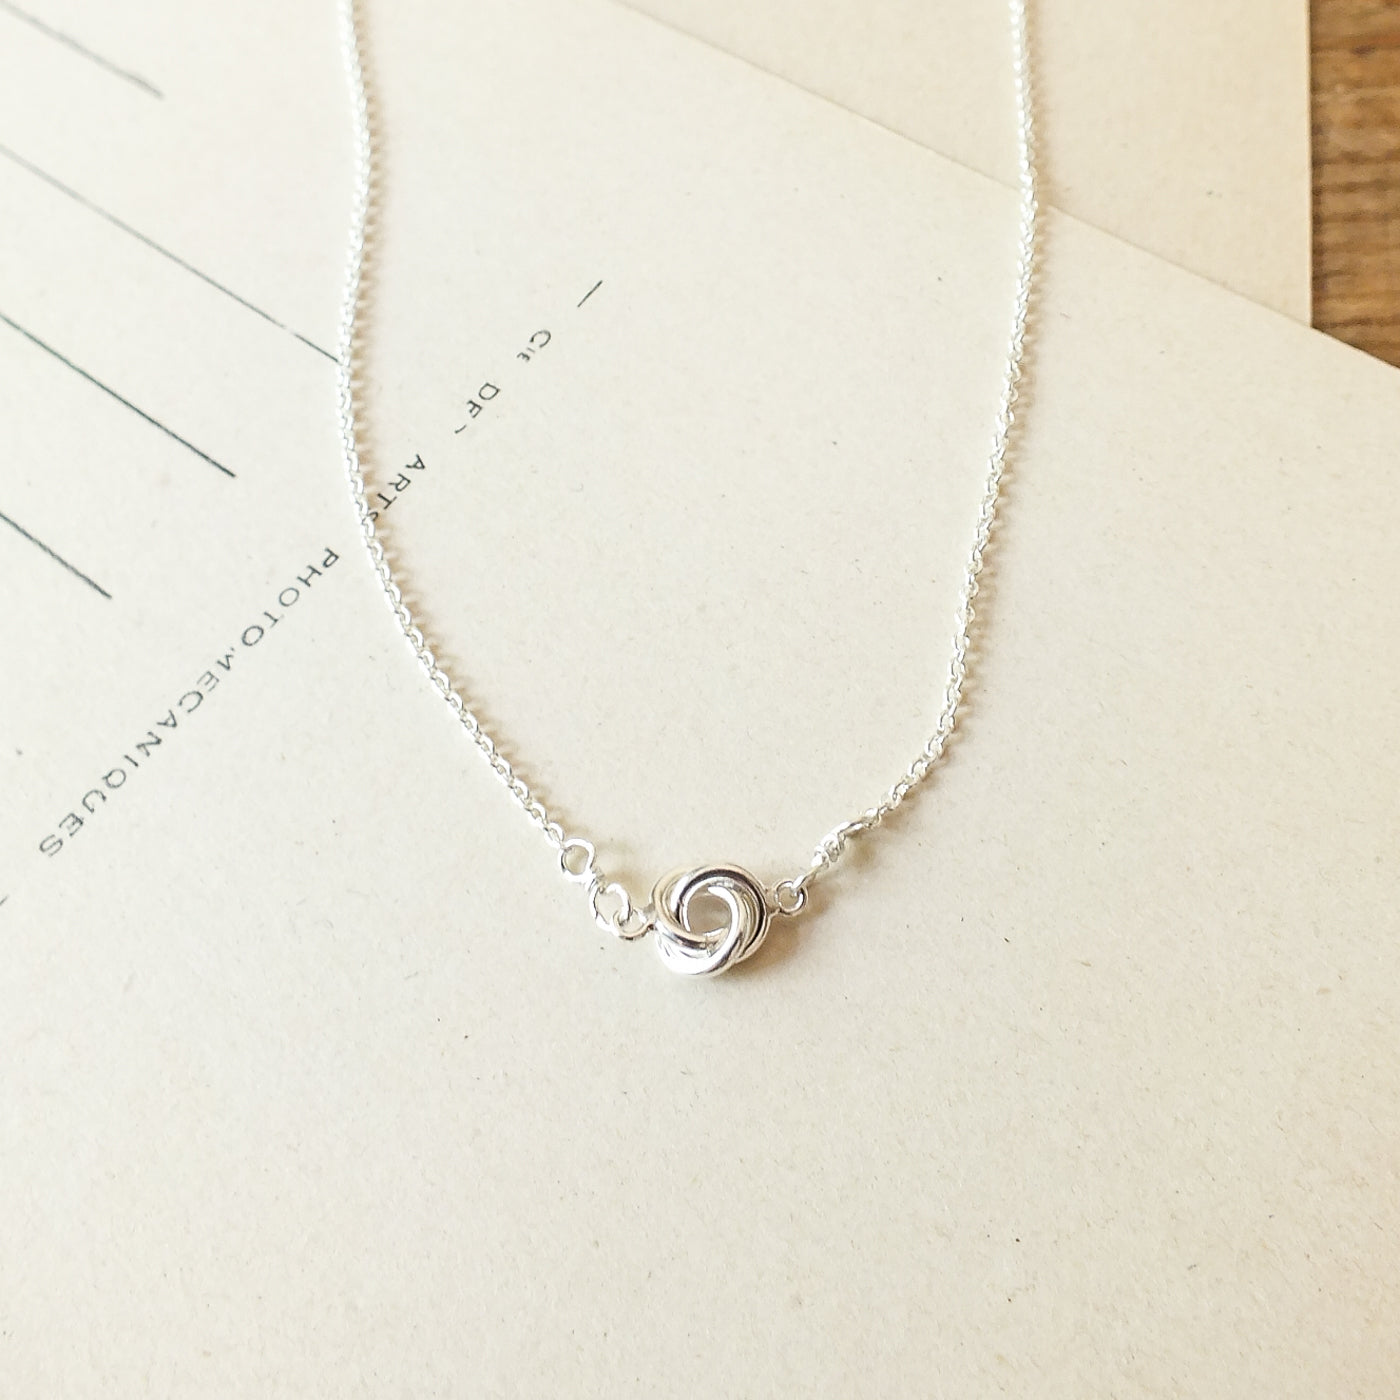 925 Sterling Silver Infinite Love knot Necklace Pendant with Rose Flow